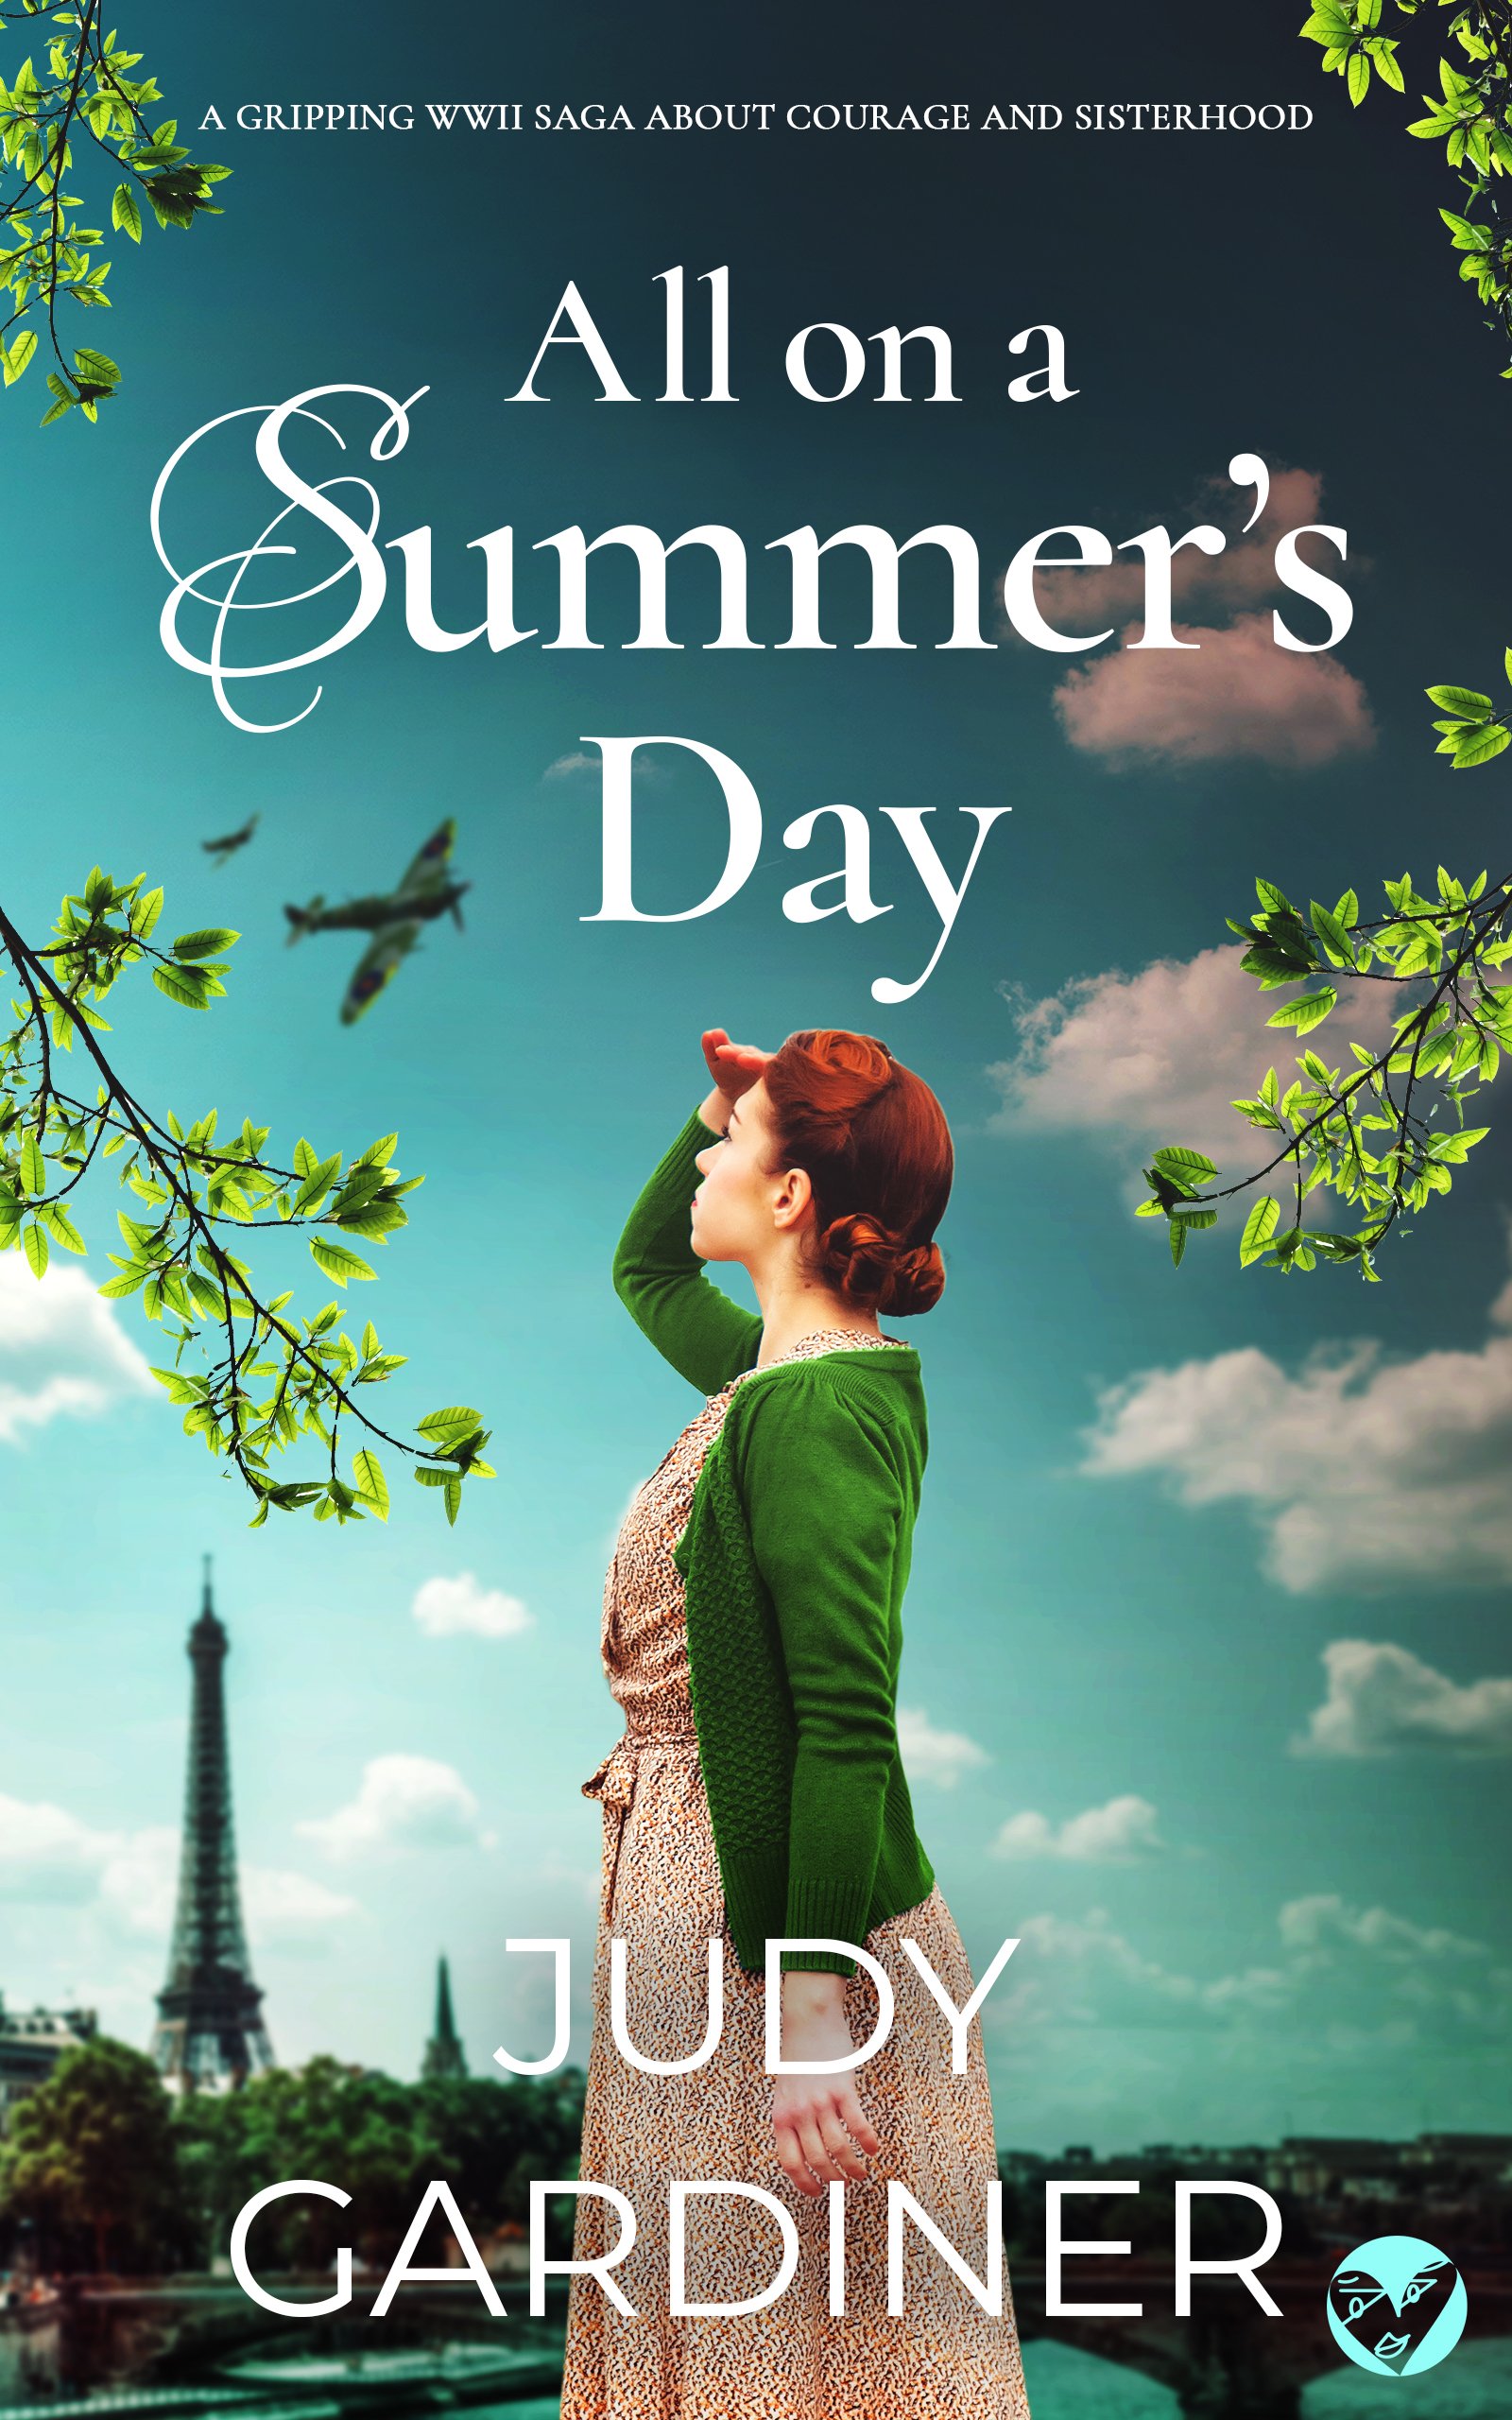 ALL ON A SUMMER'S DAY Cover publish.jpg